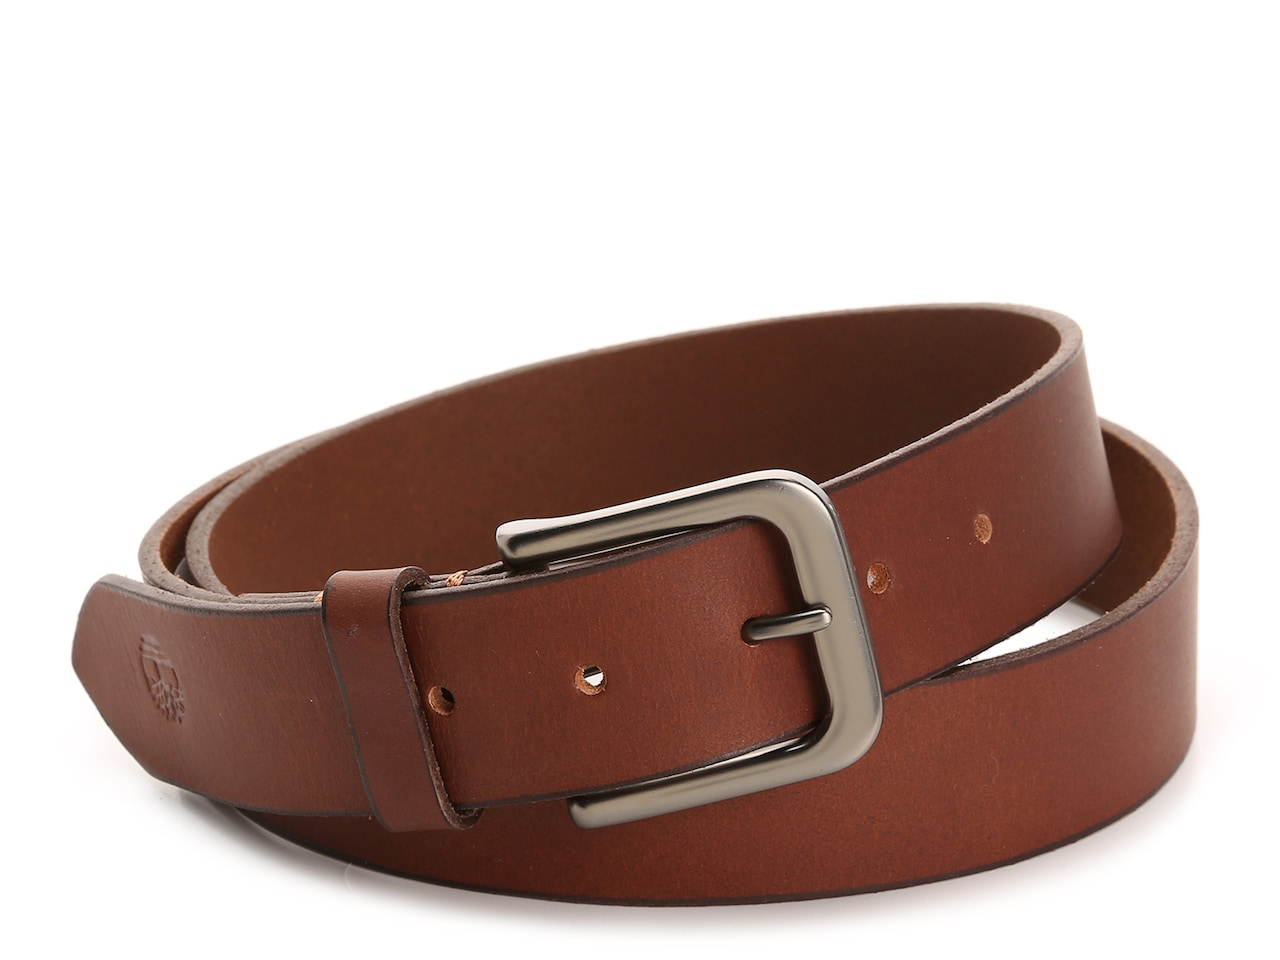 Timberland Men's Smooth or Pull Up Leather Belt $11.69 + Free Shipping